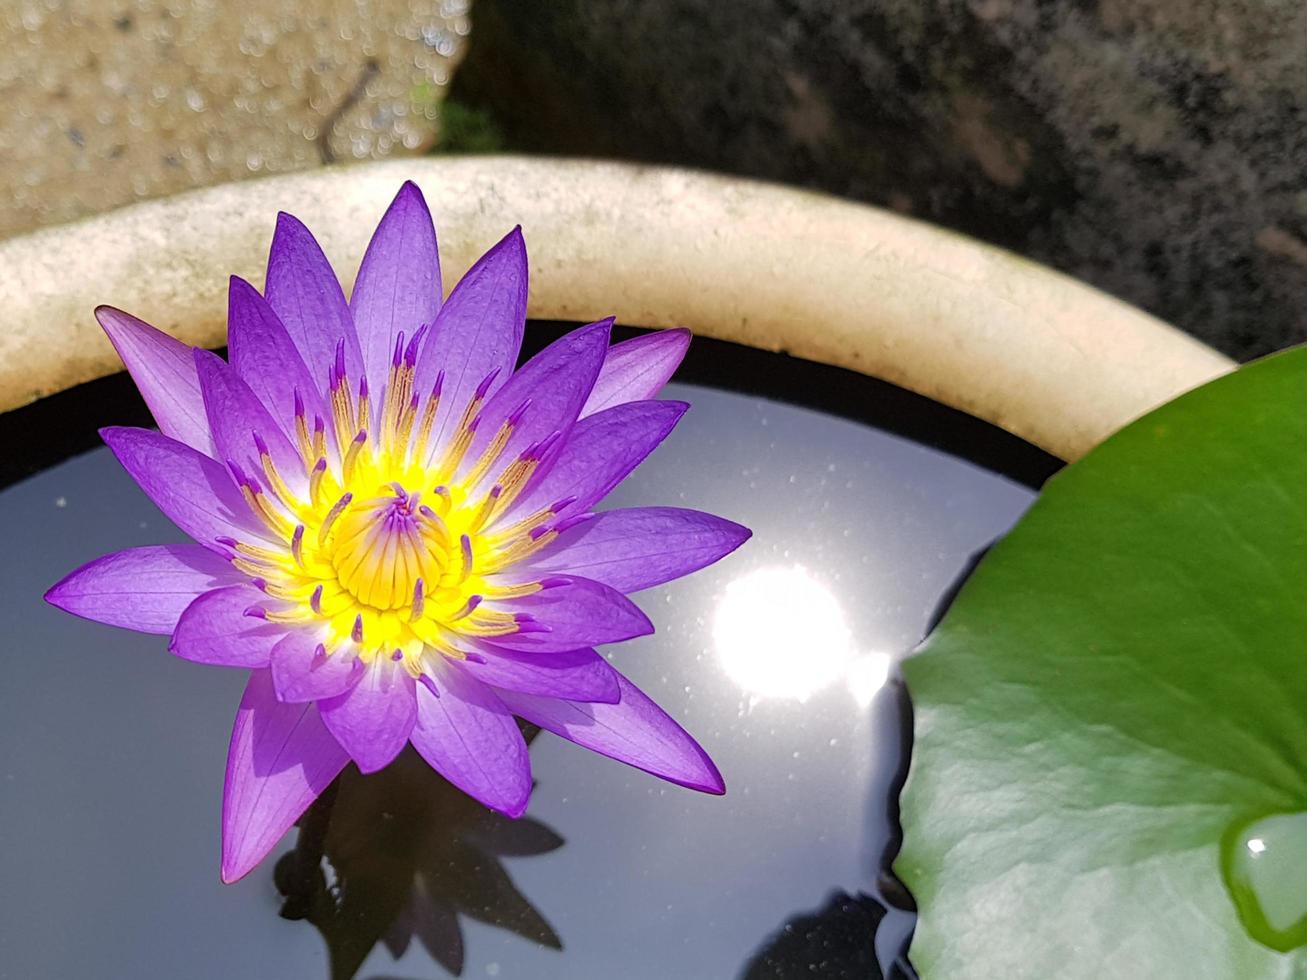 The lotus flower is purple with a yellow and white center in a small pond photo